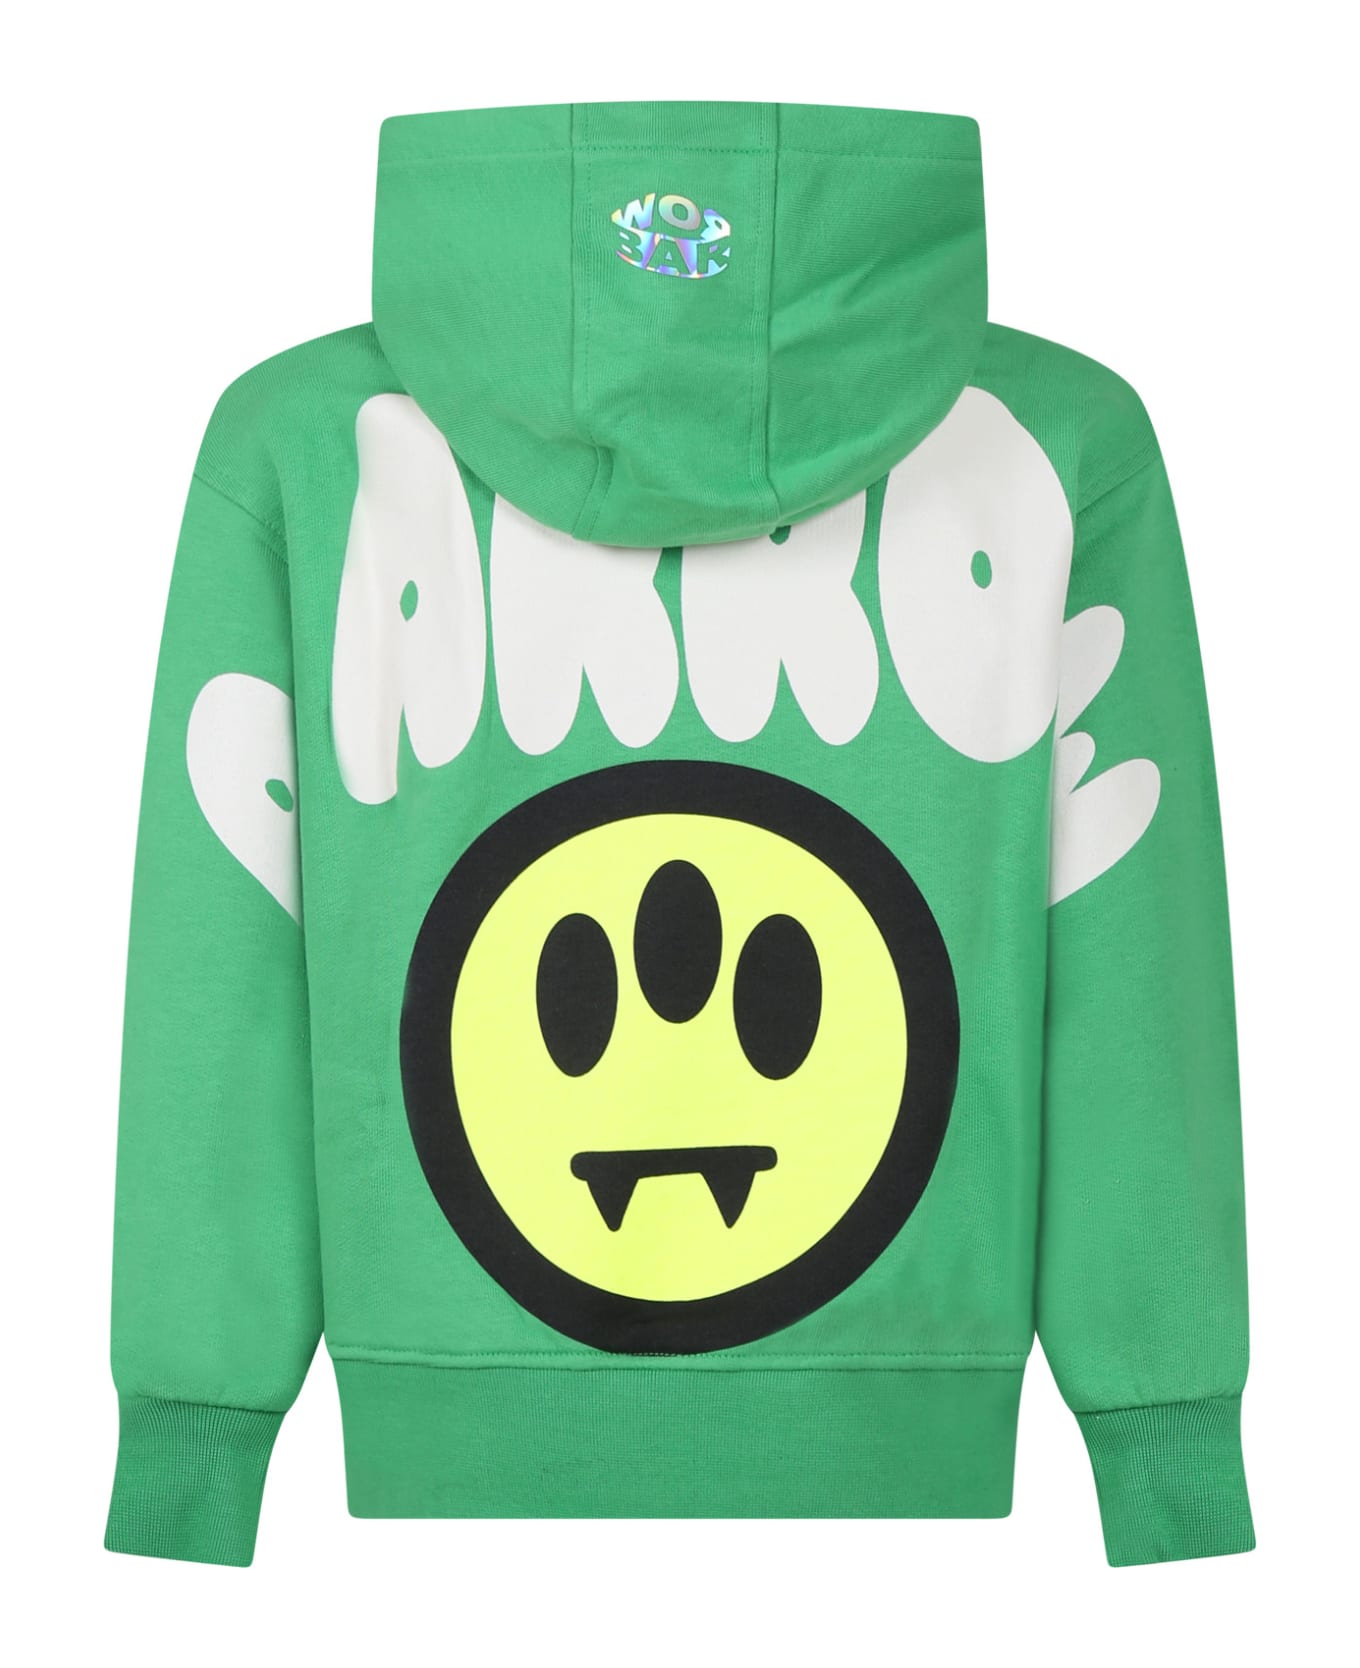 Barrow Green Sweatshirt For Kids With Logo And Iconic Smiley Face - Green